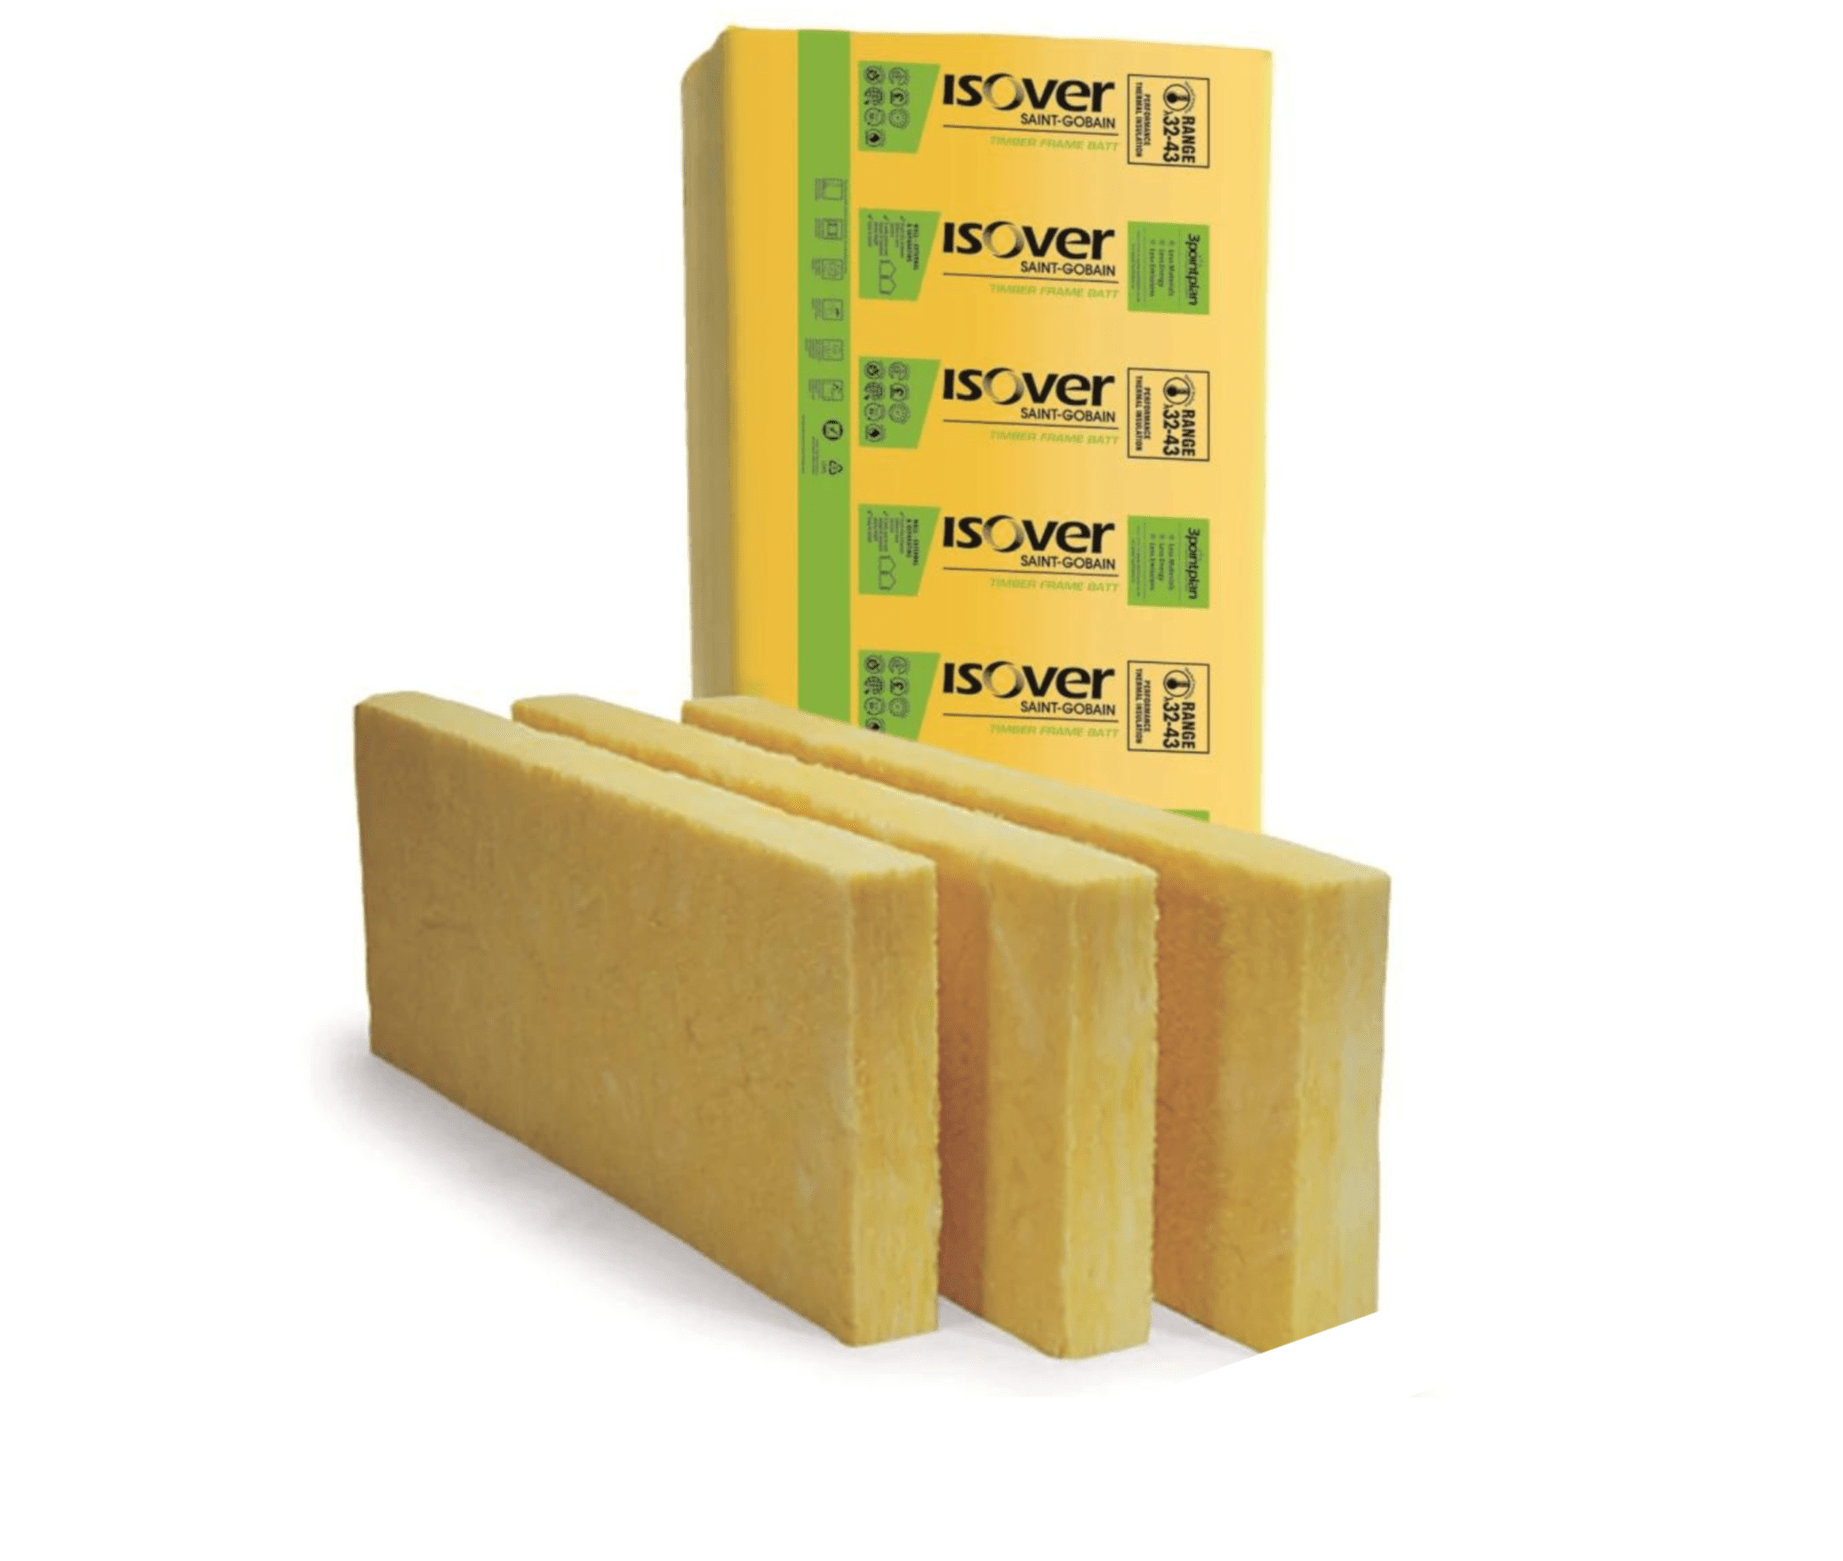 Isover Insulation D50 x W570 x L1175mm - 6.03m2 - Batts Per Pack x 9 (m2.K/W) 1.55 Isover Timber Frame Batt Isover Timber Frame Batt - insulationuk.co.uk